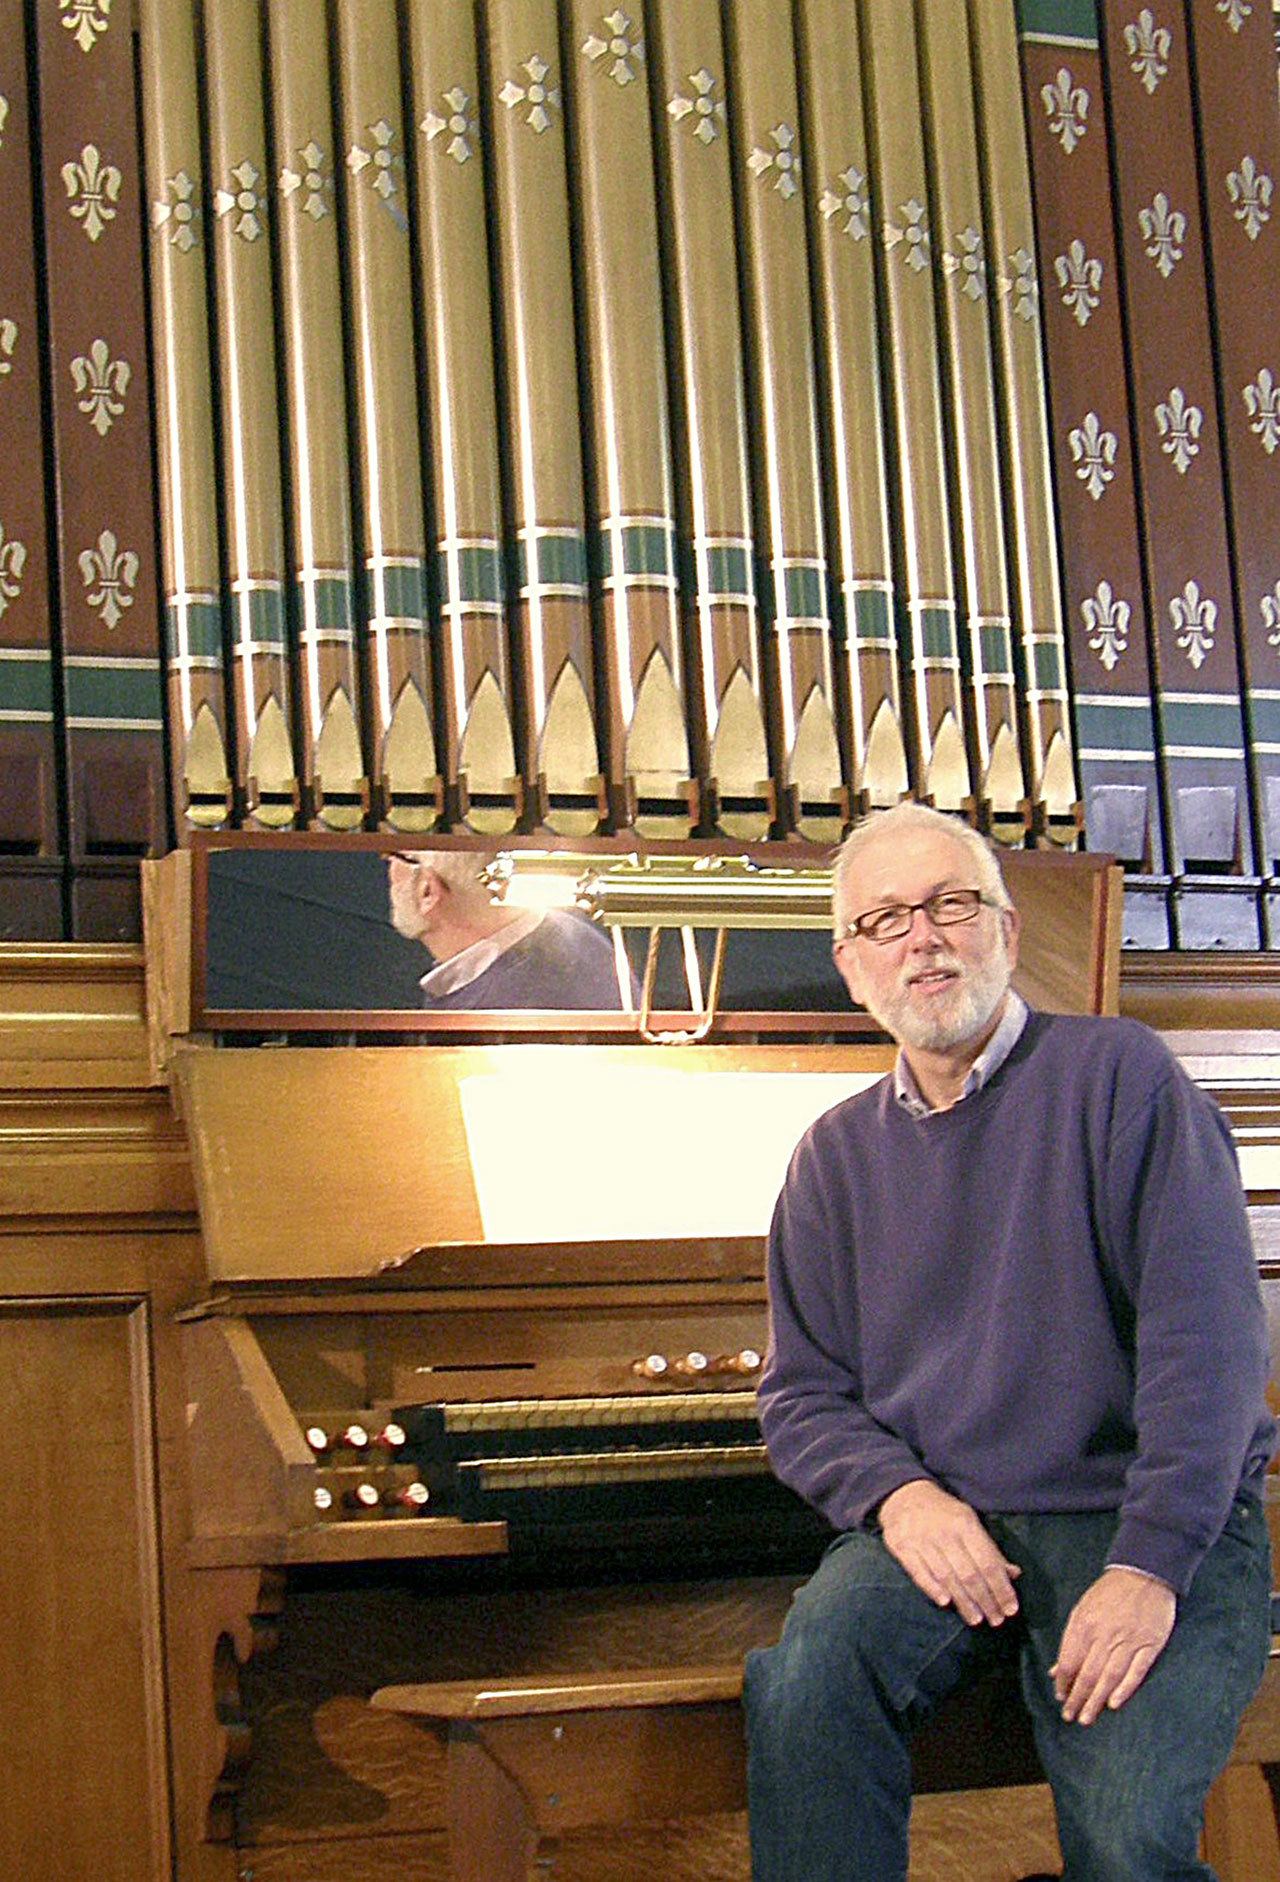 Organist Woody Bernas will breathe new life into classical music during an October Candlelight Concert Thursday at Trinity United Methodist Church, 609 Taylor St. During his performance, Bernas will perform at the console of a 2,000 pipe replica of a Baroque era instrument built in 1735. —Woody Bernas.